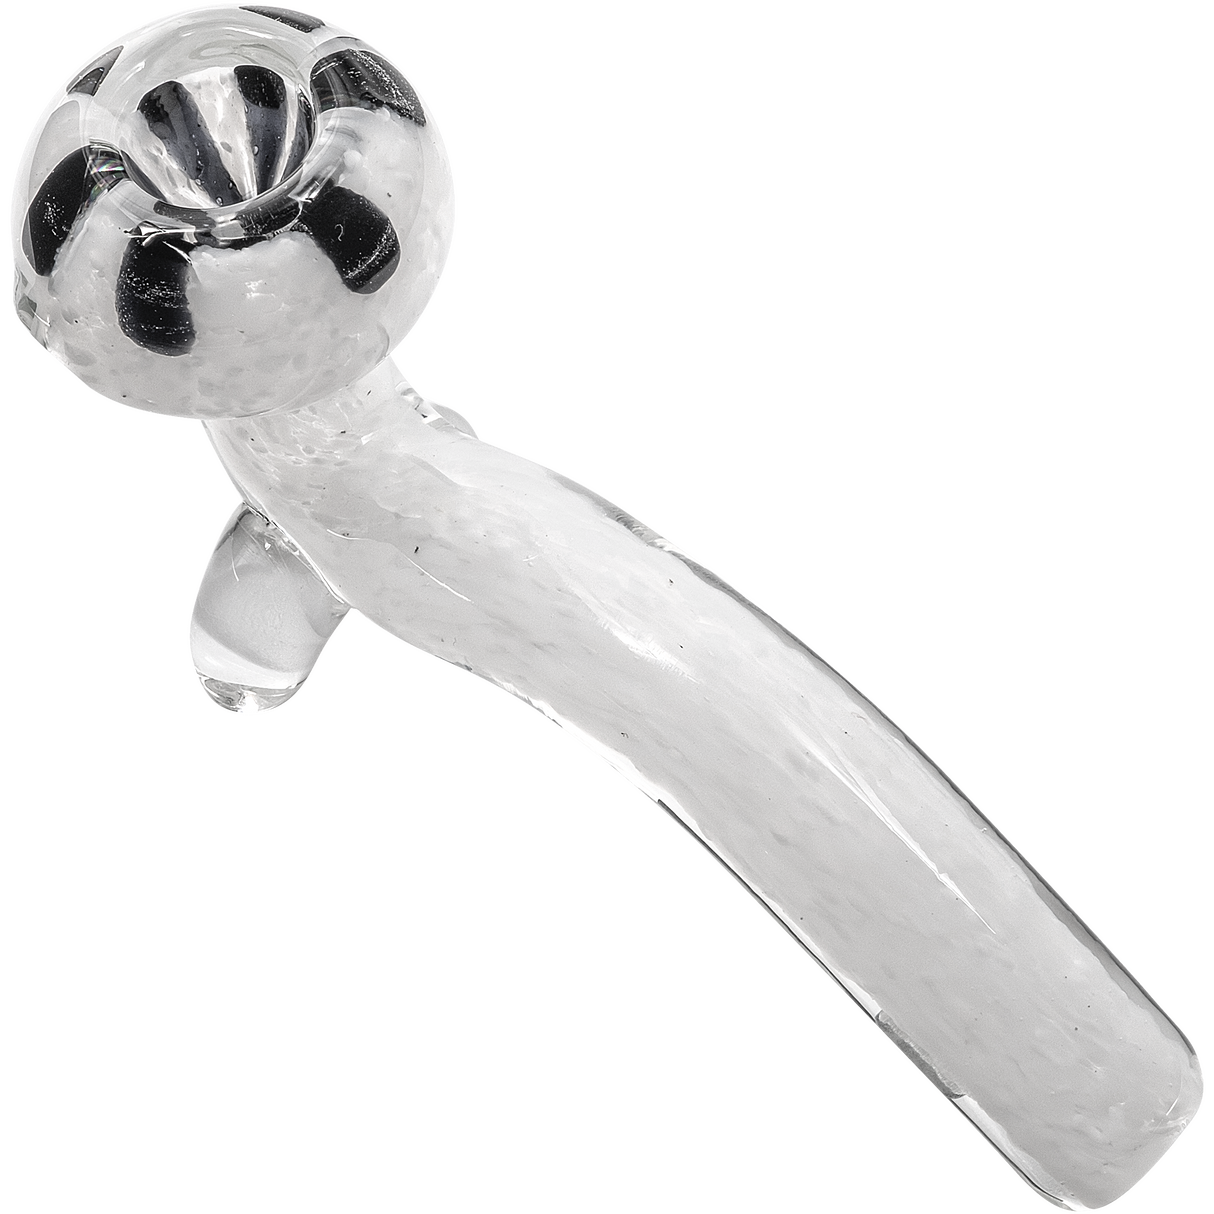 LA Pipes White Fritted Sherlock Pipe with Black Daisy Bowl, Compact Design, Borosilicate Glass